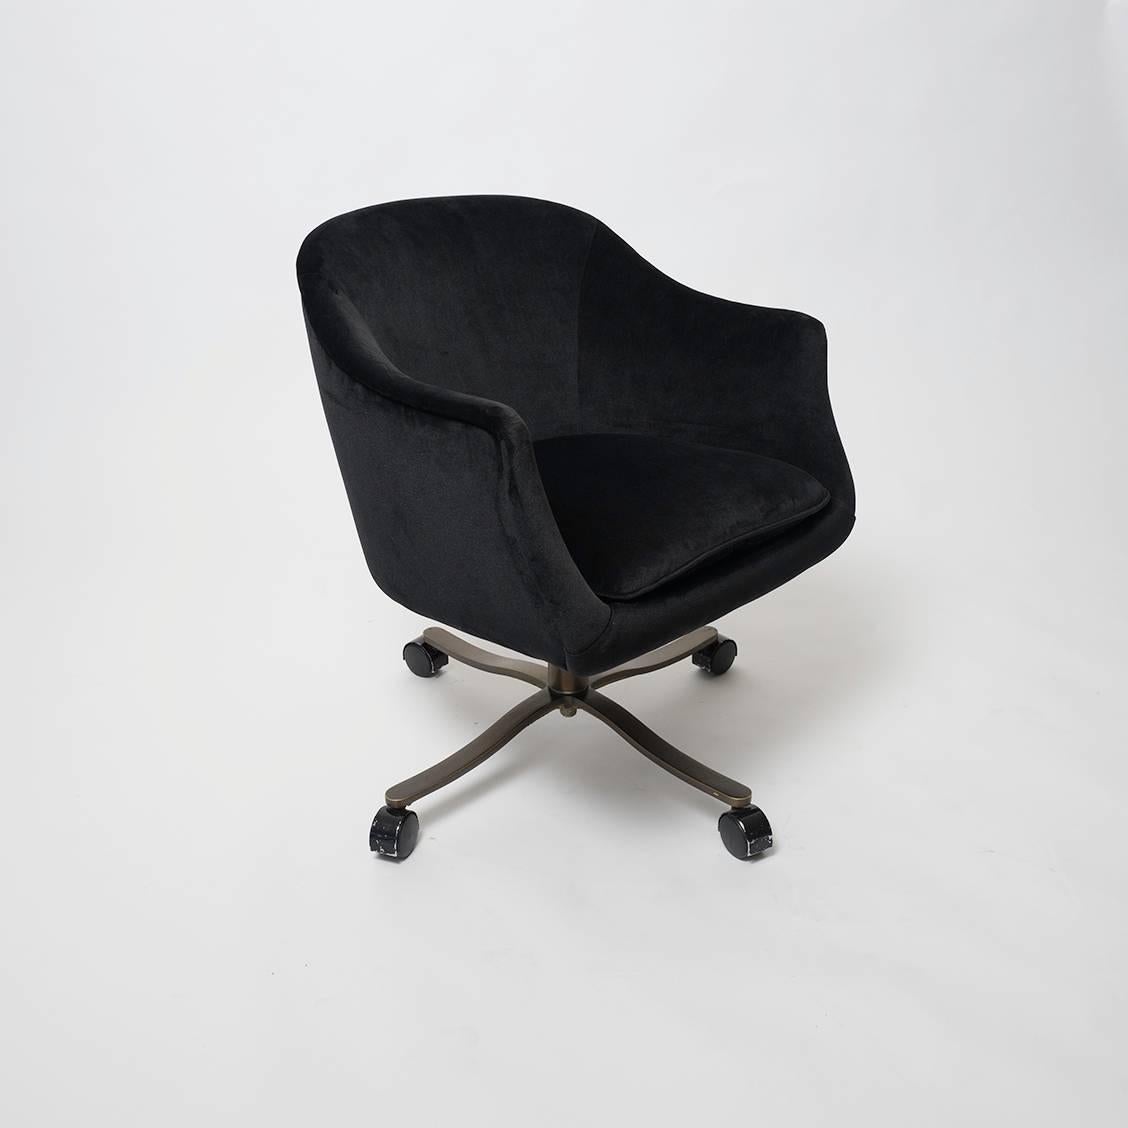 Mid-20th Century Single Swiveling Conference Chair by Nicos Zographos